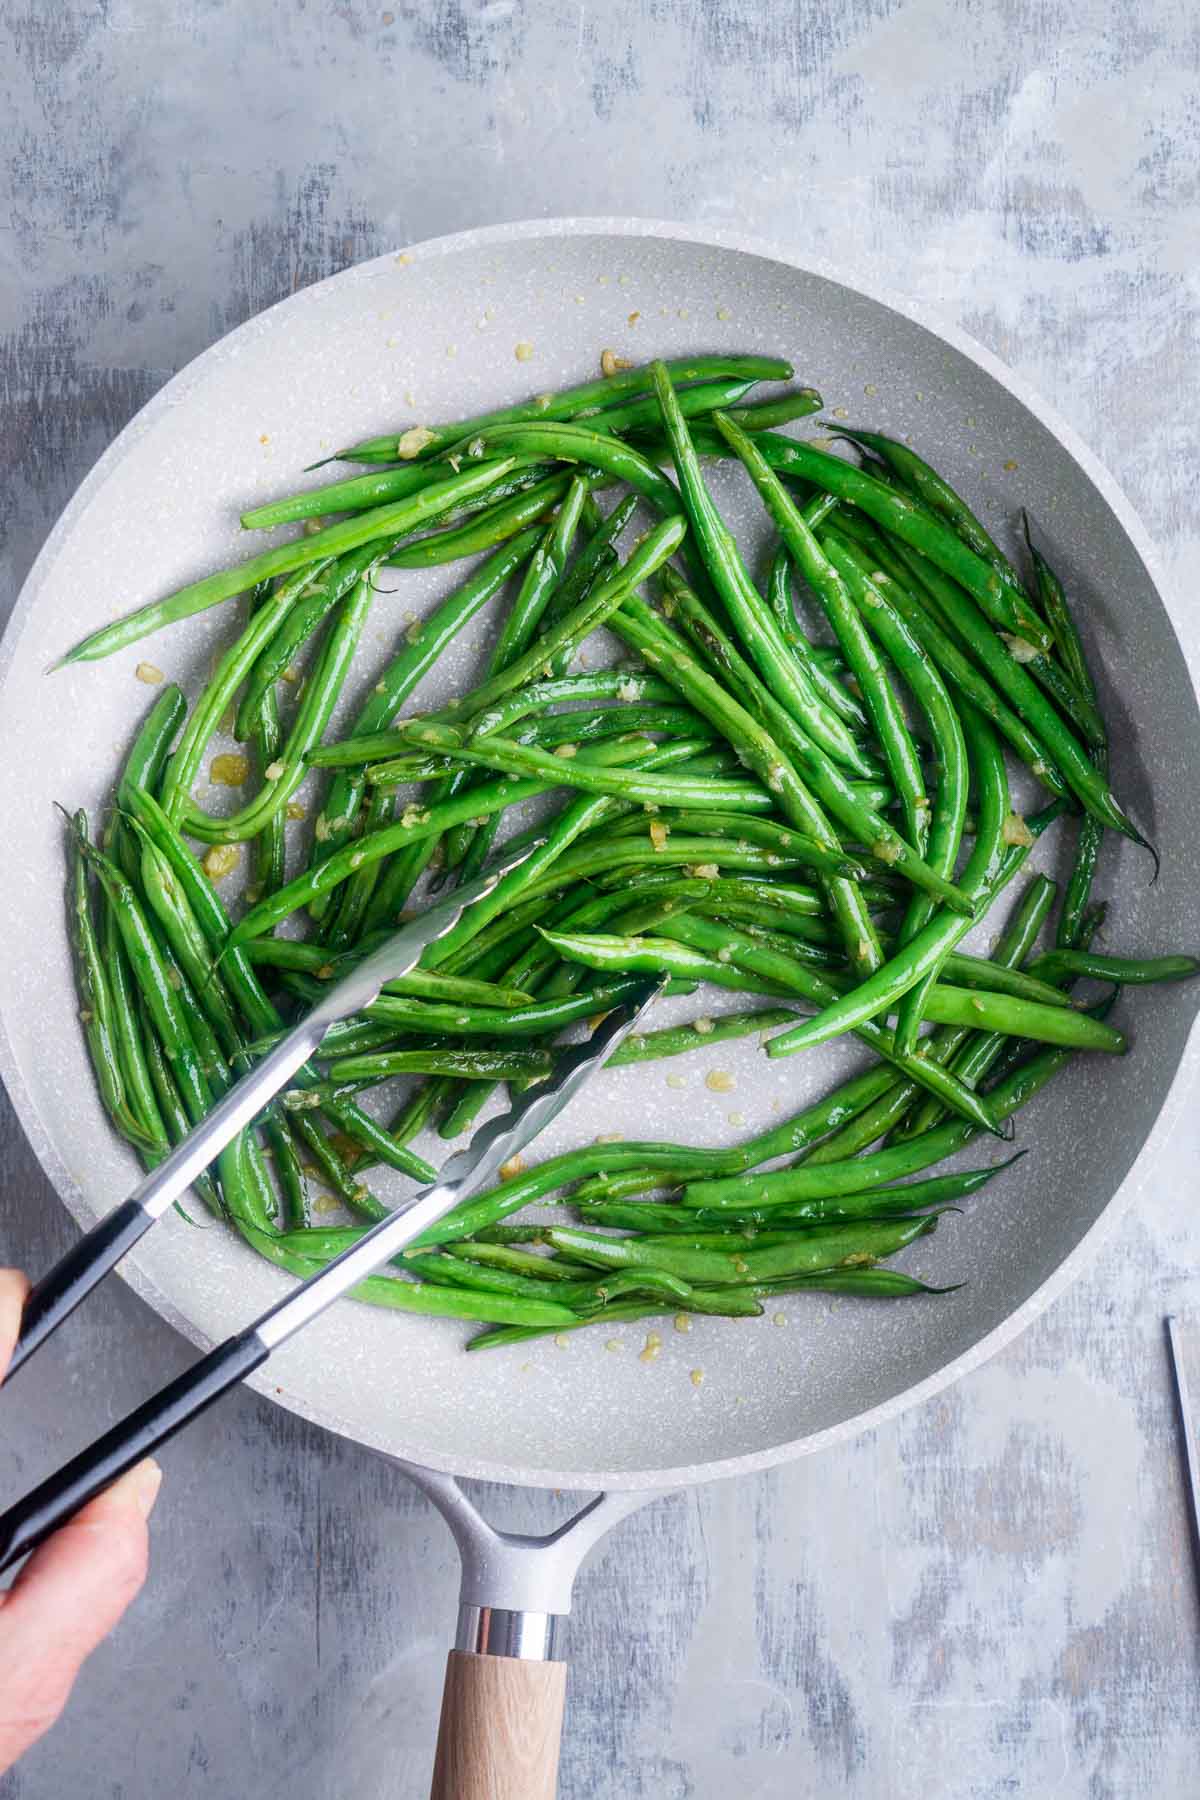 green beans sauteing in skillet are tossed with tongs